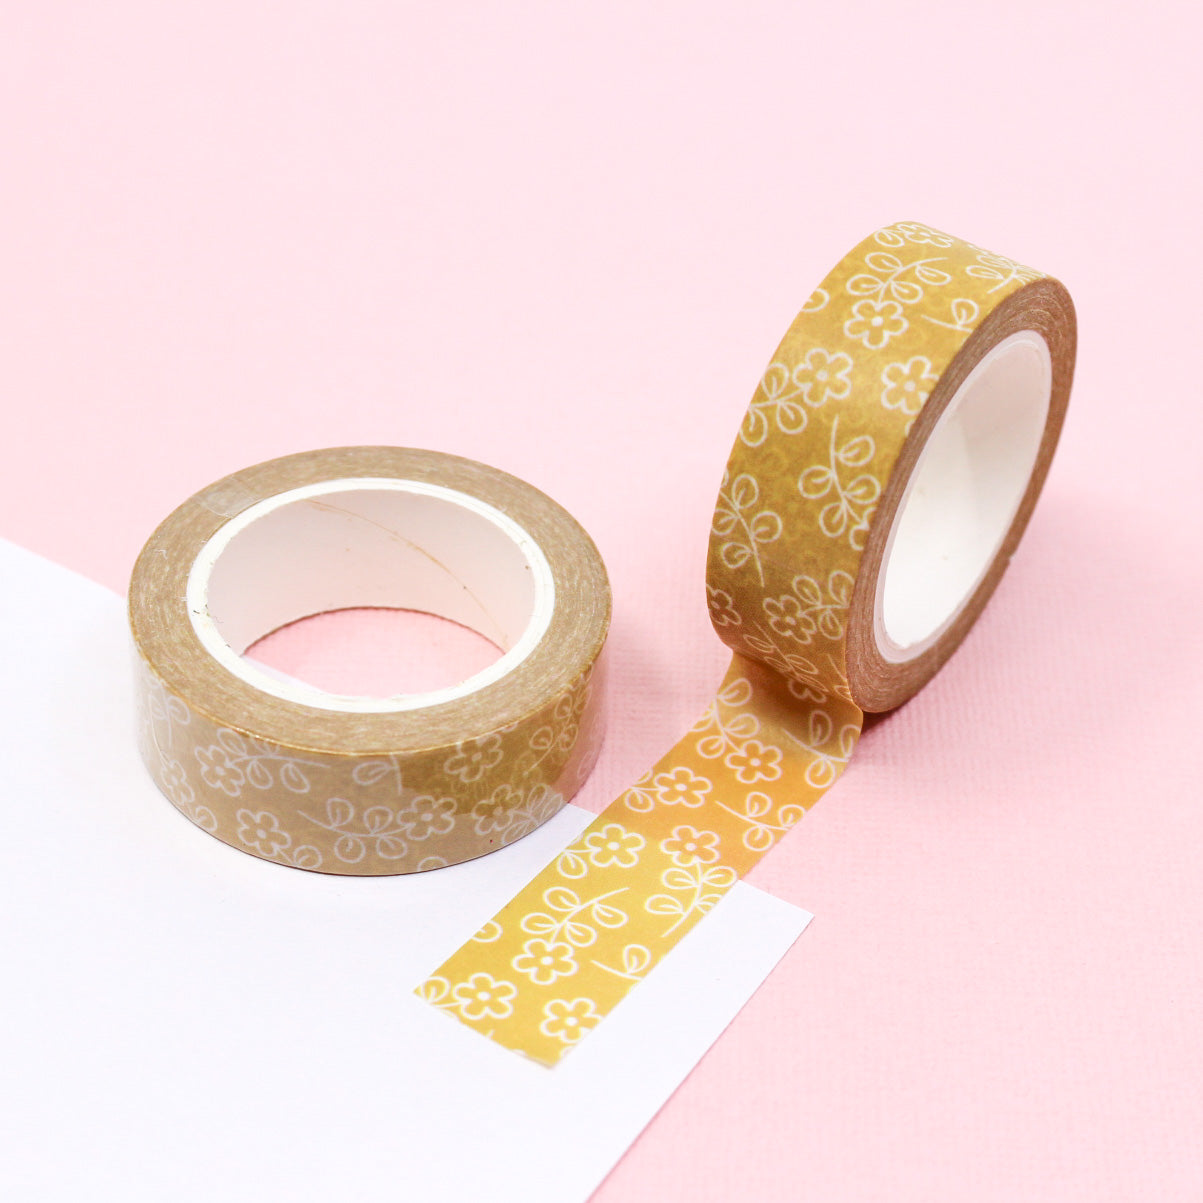 This vibrant washi tape features a pattern of yellow daisy flowers, perfect for adding a cheerful touch to your crafts and projects. This tape is sold at BBB Supplies Craft Shop.